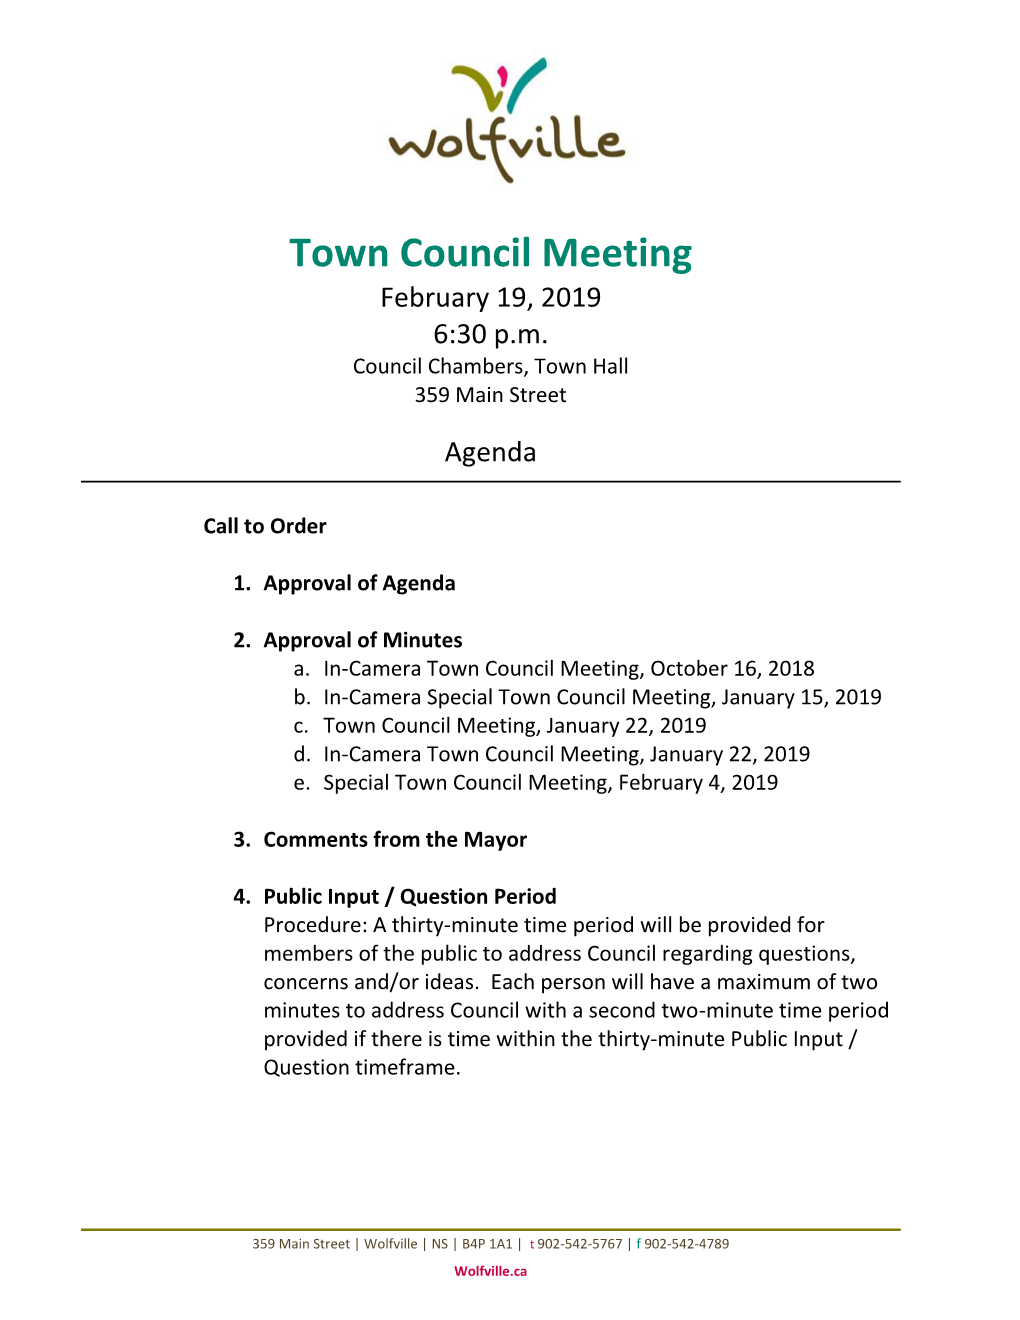 Town Council Meeting February 19, 2019 6:30 P.M